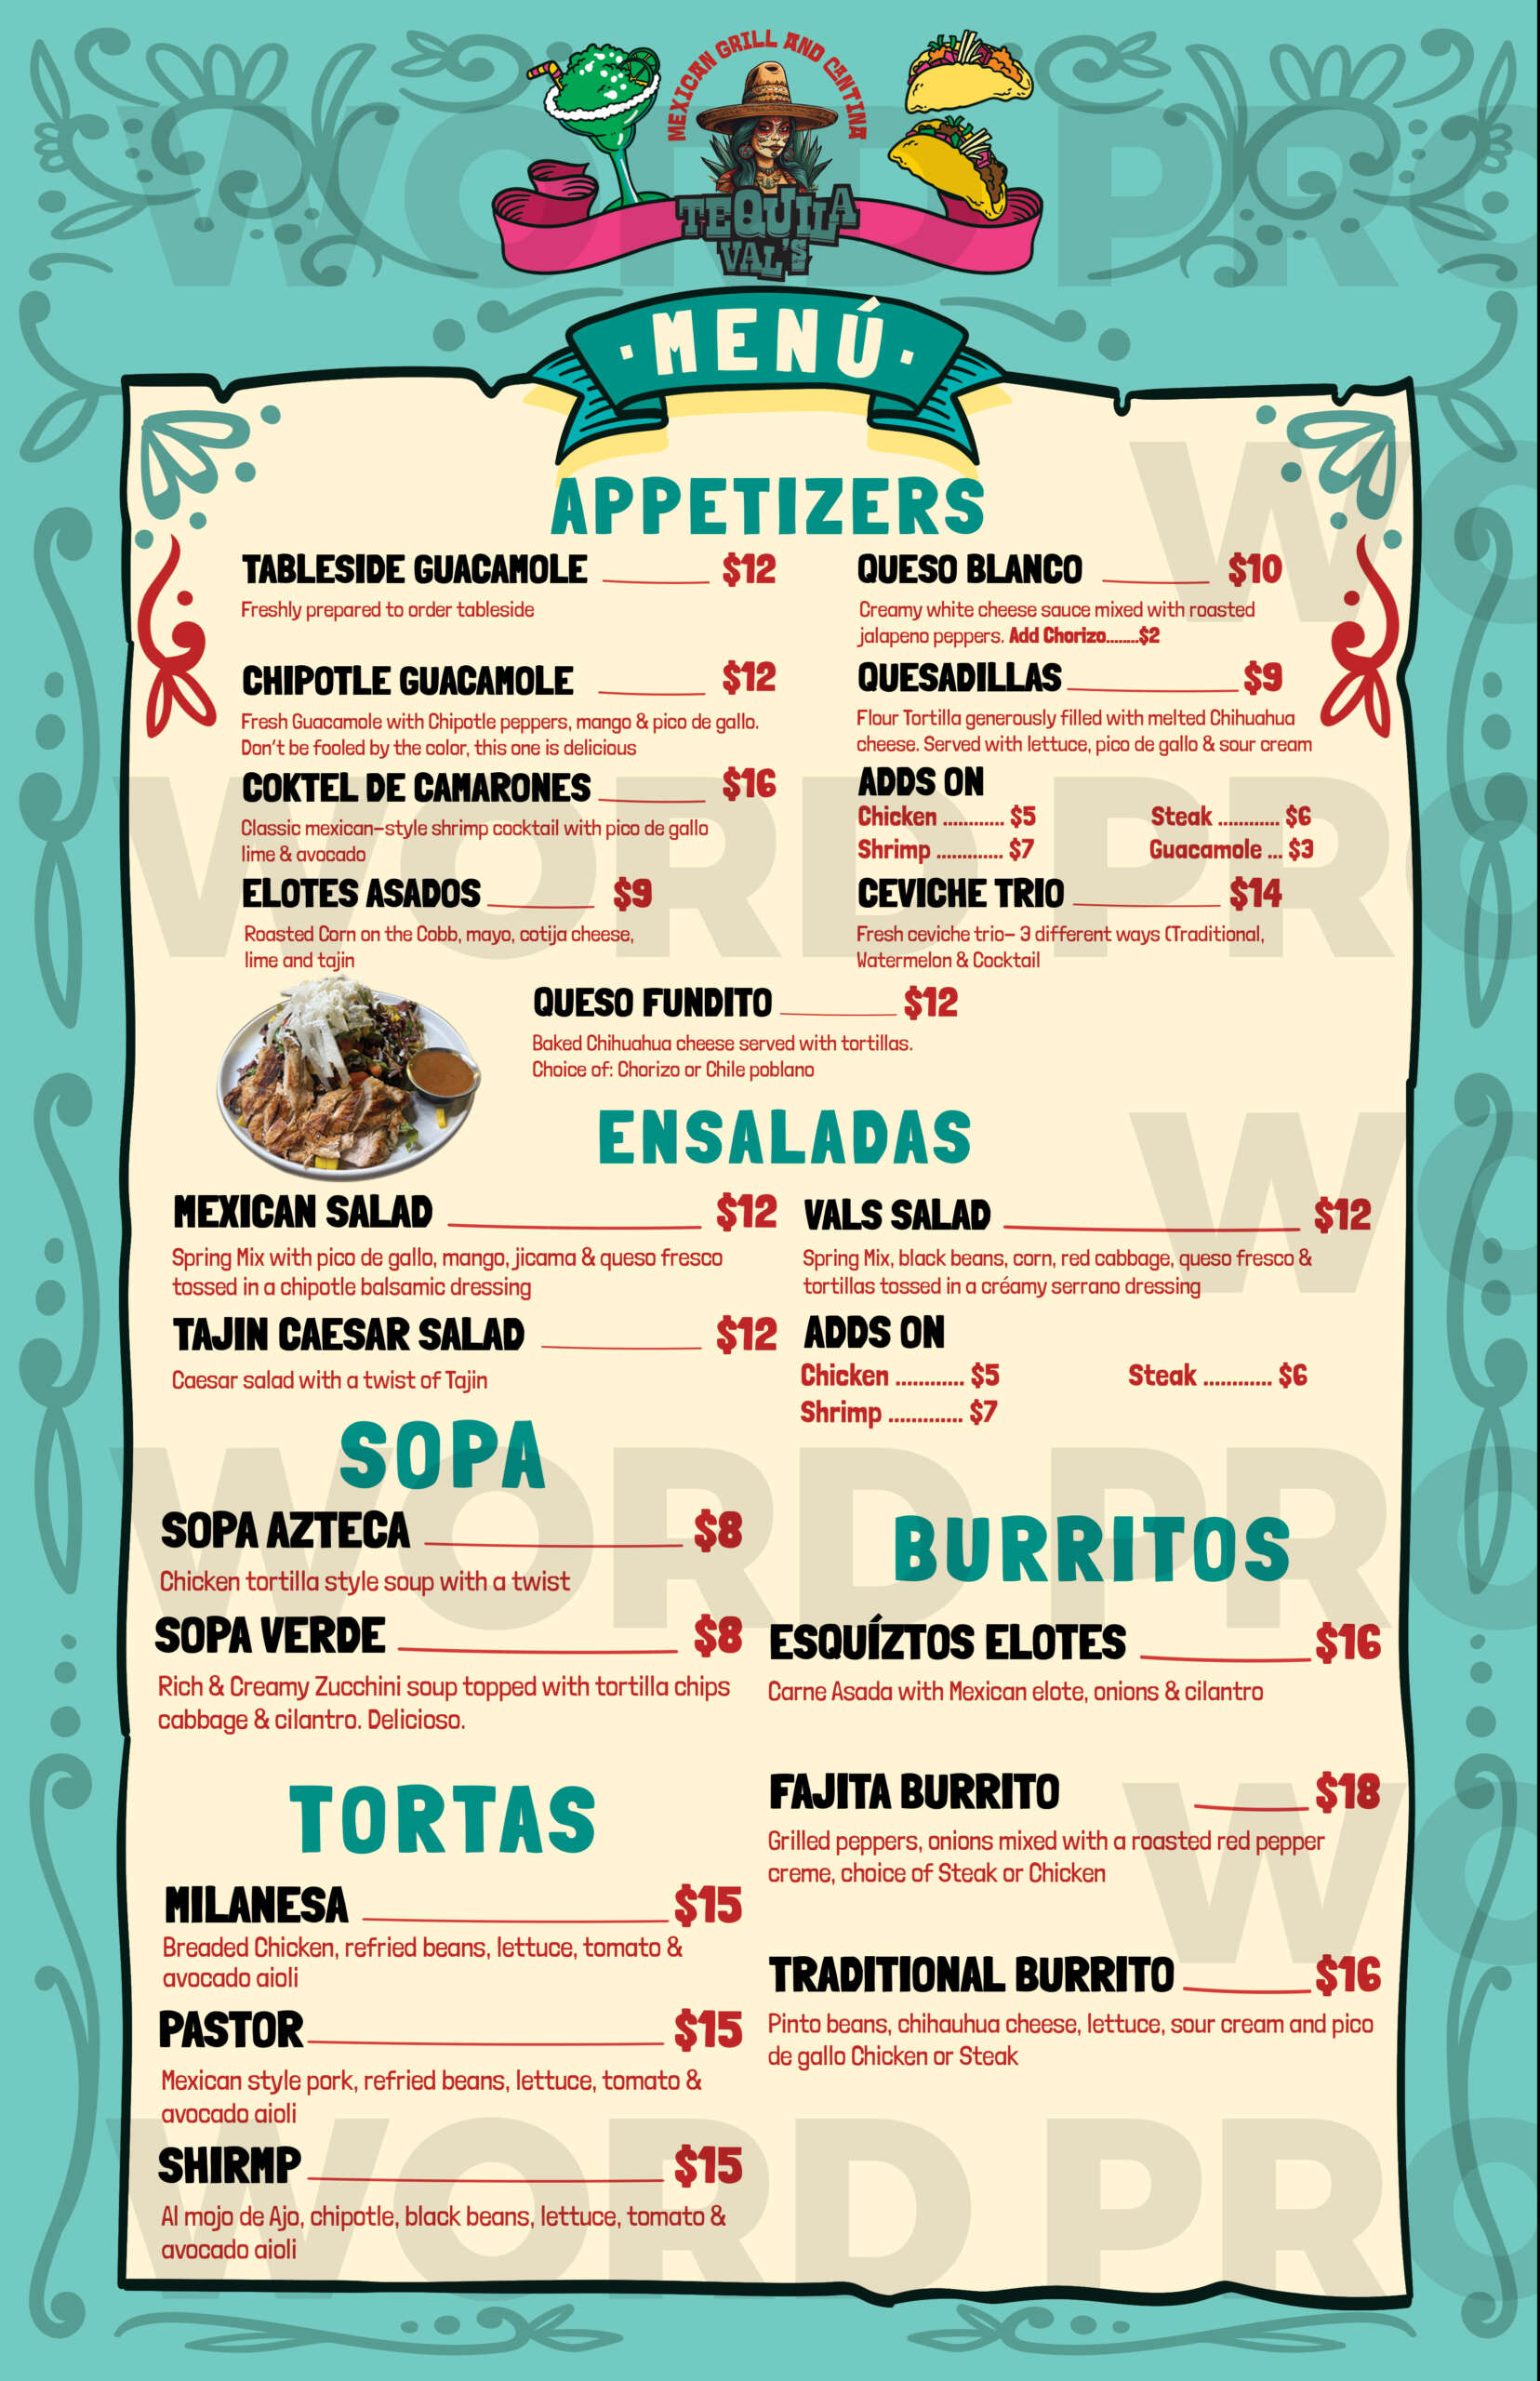 Tequila Val's Menu - First Page